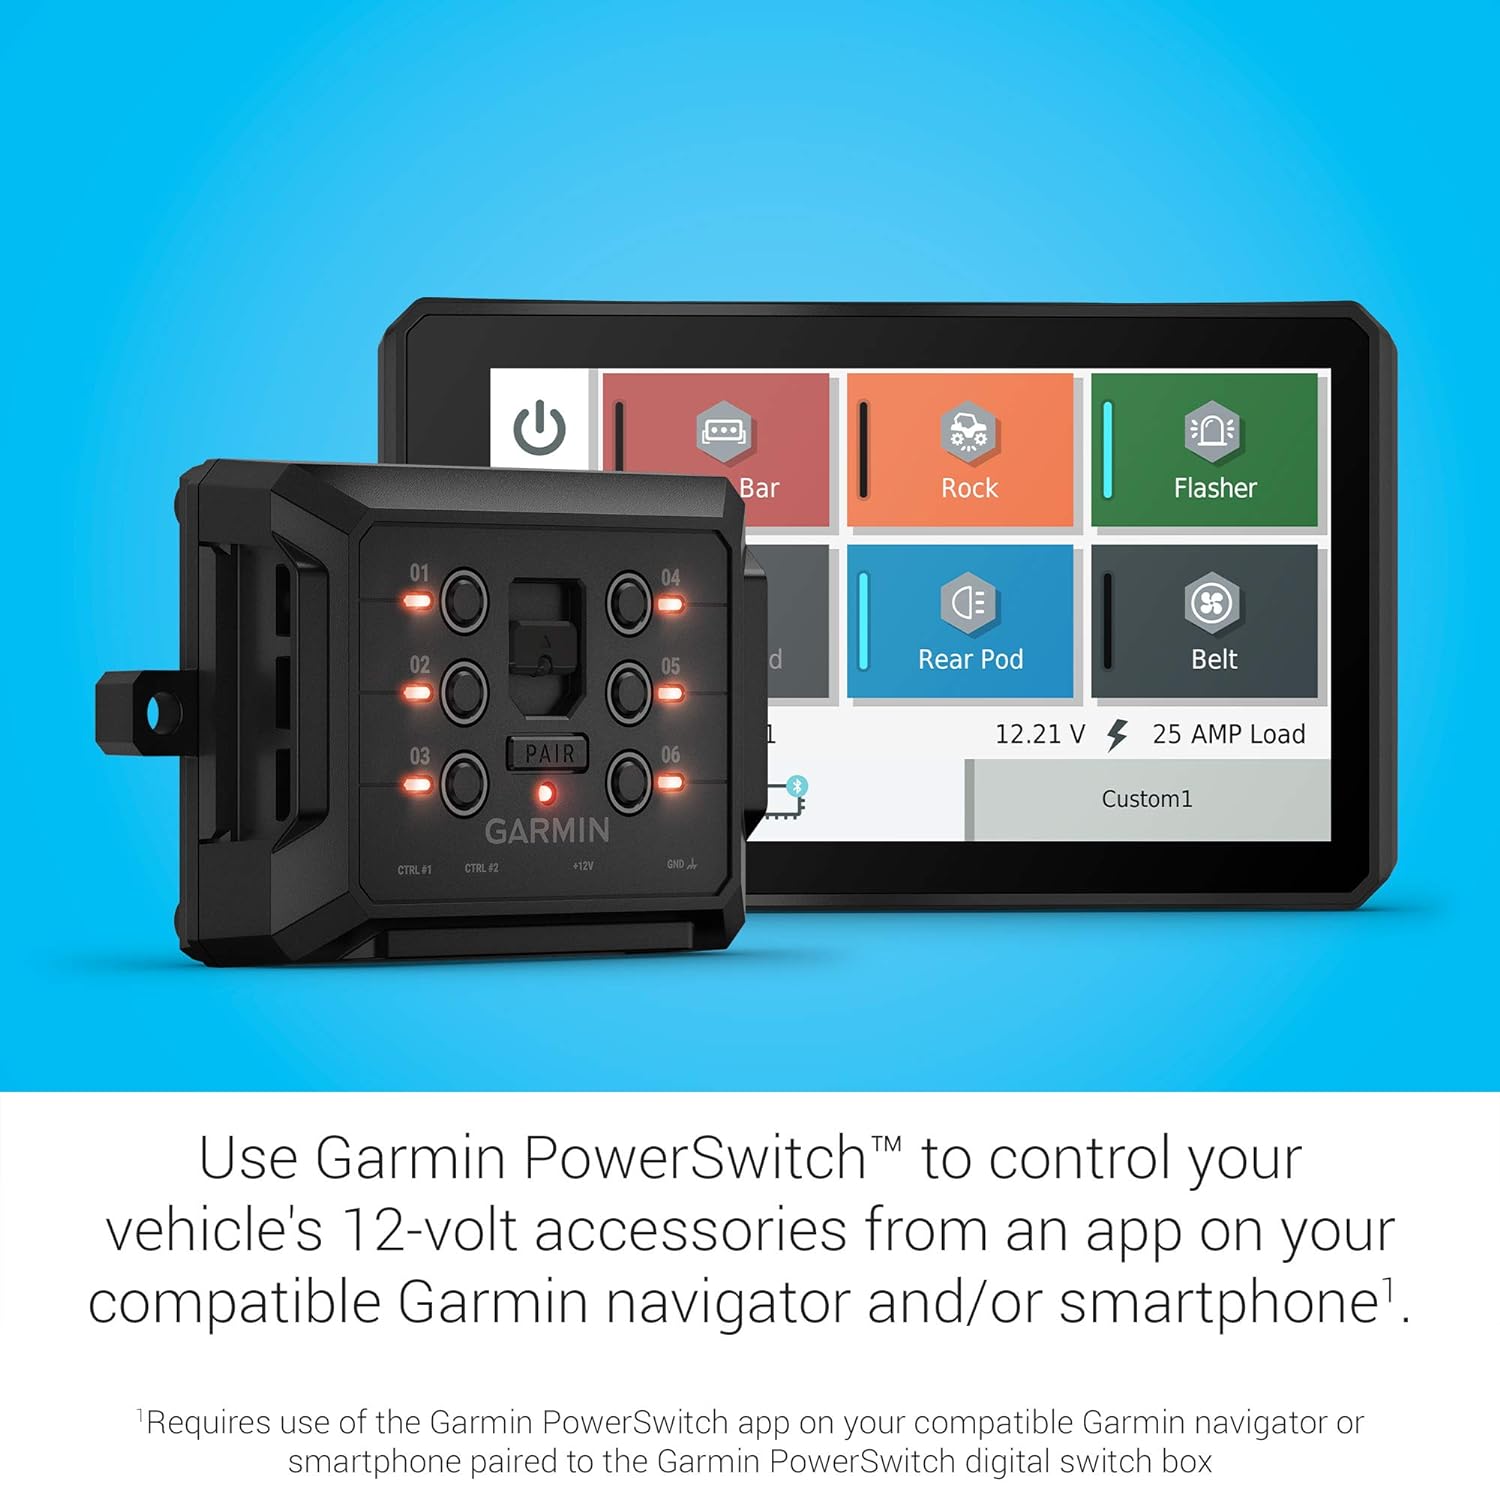 Garmin PowerSwitch, 6 Gang Compact Digital Switch Box, Requires Compatible Garmin Navigator or Smartphone, Switch Panel for C…